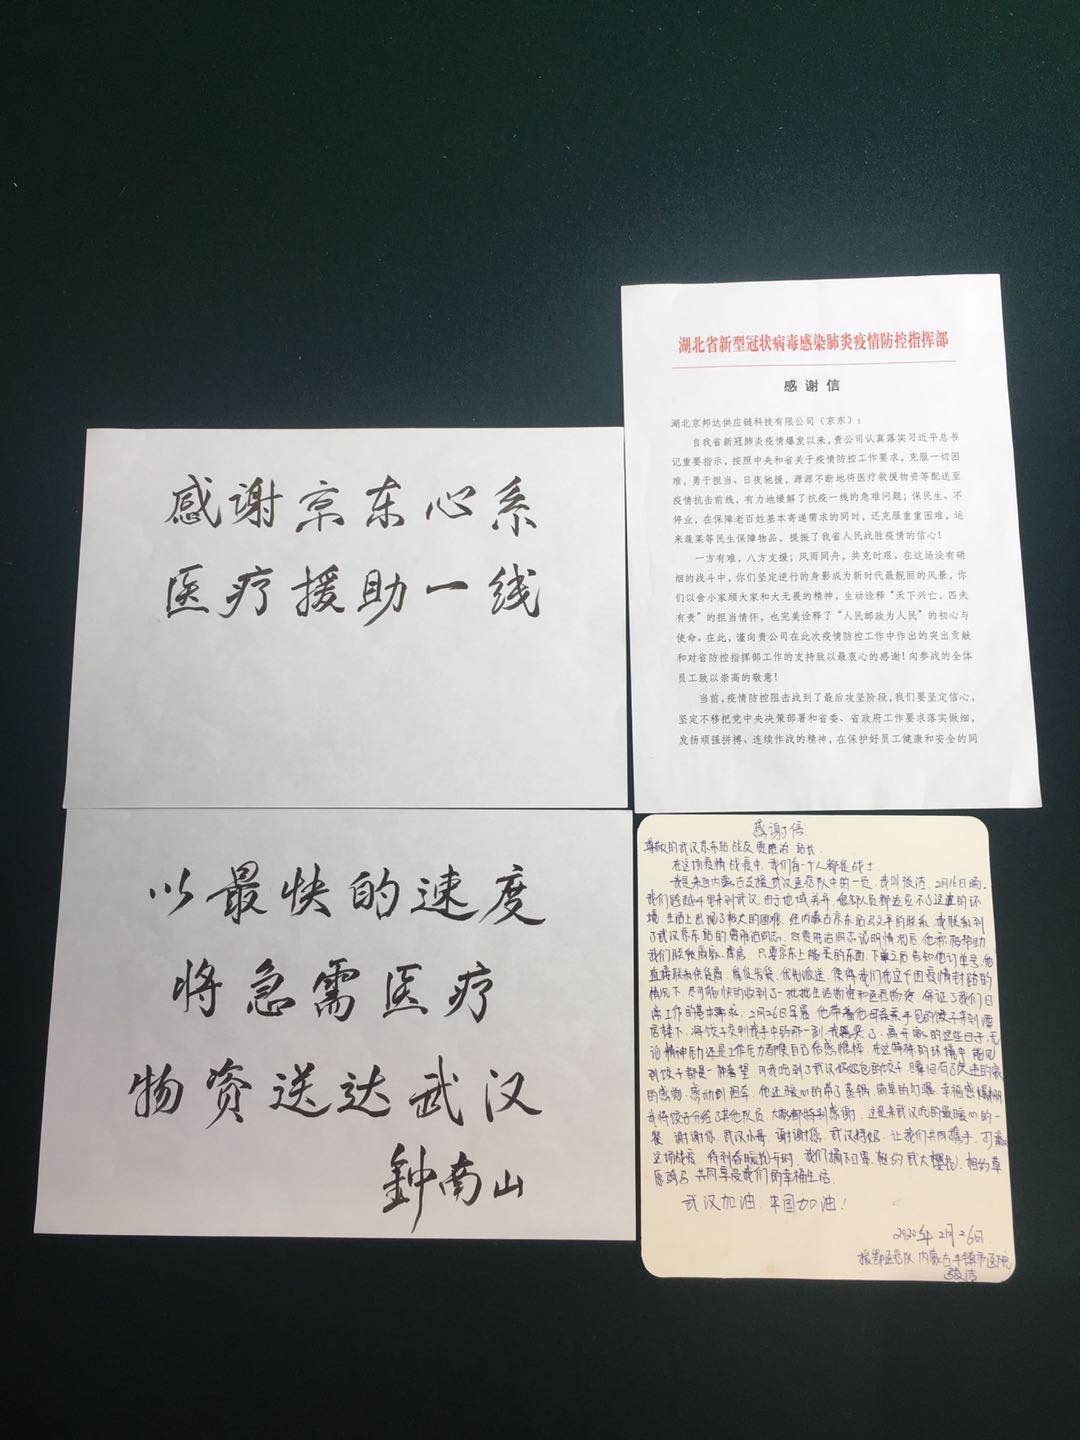 Letters showing appreciation for JD’s efforts against the pandemic